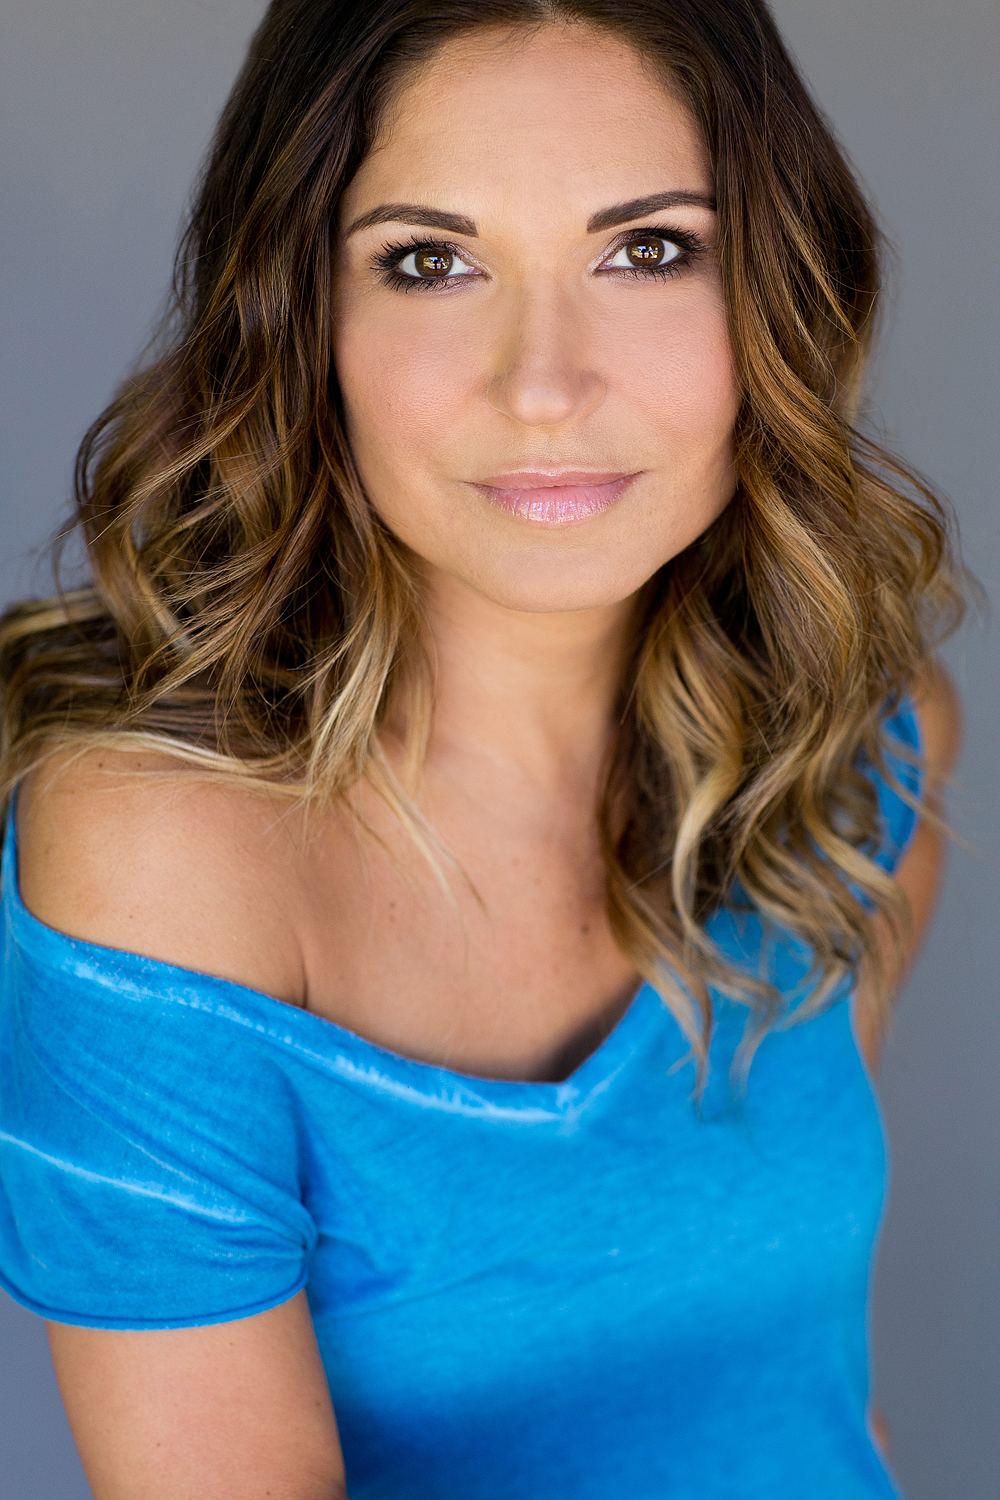 August 2014 Commercial Headshot.